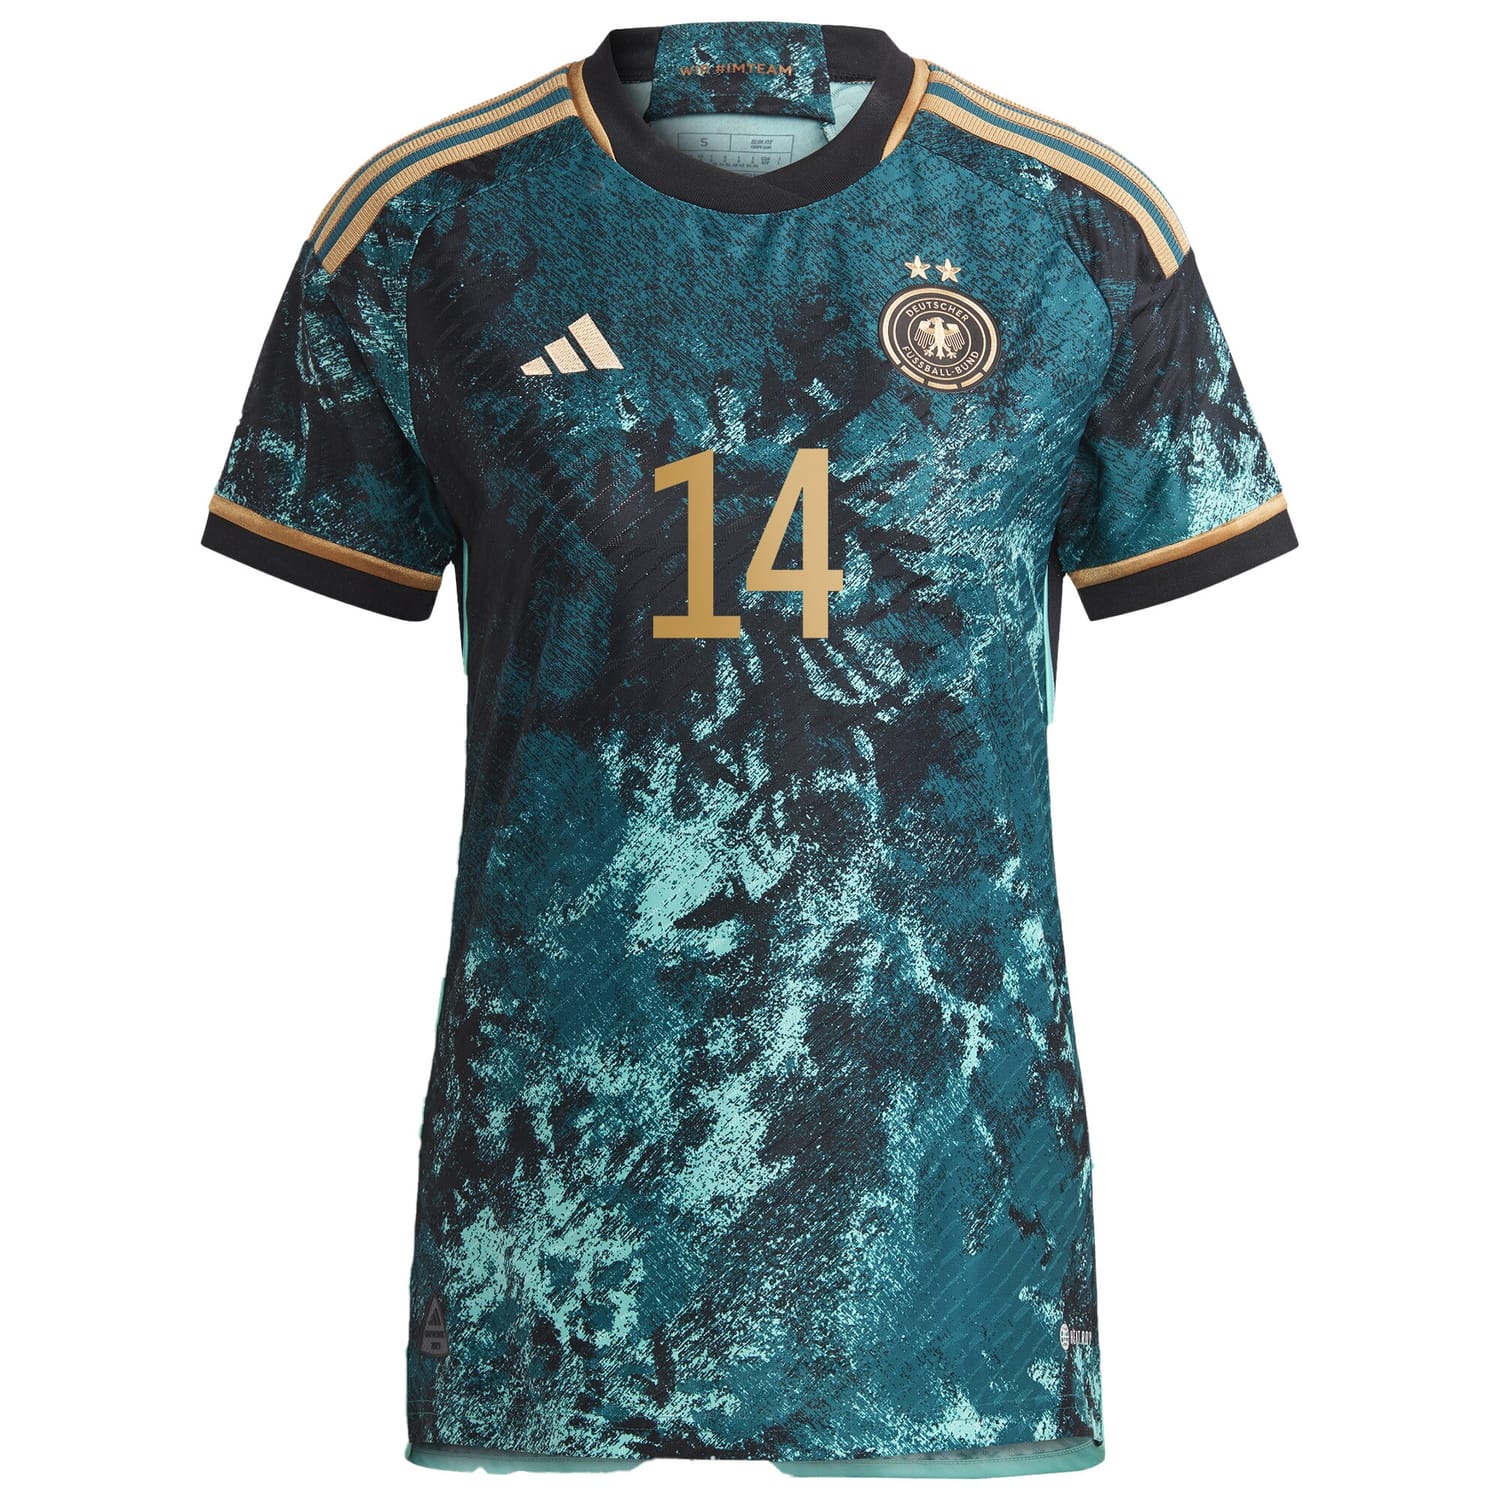 Germany National Team Away Authentic Jersey Shirt 2023 player Lena Lattwein 14 printing for Women